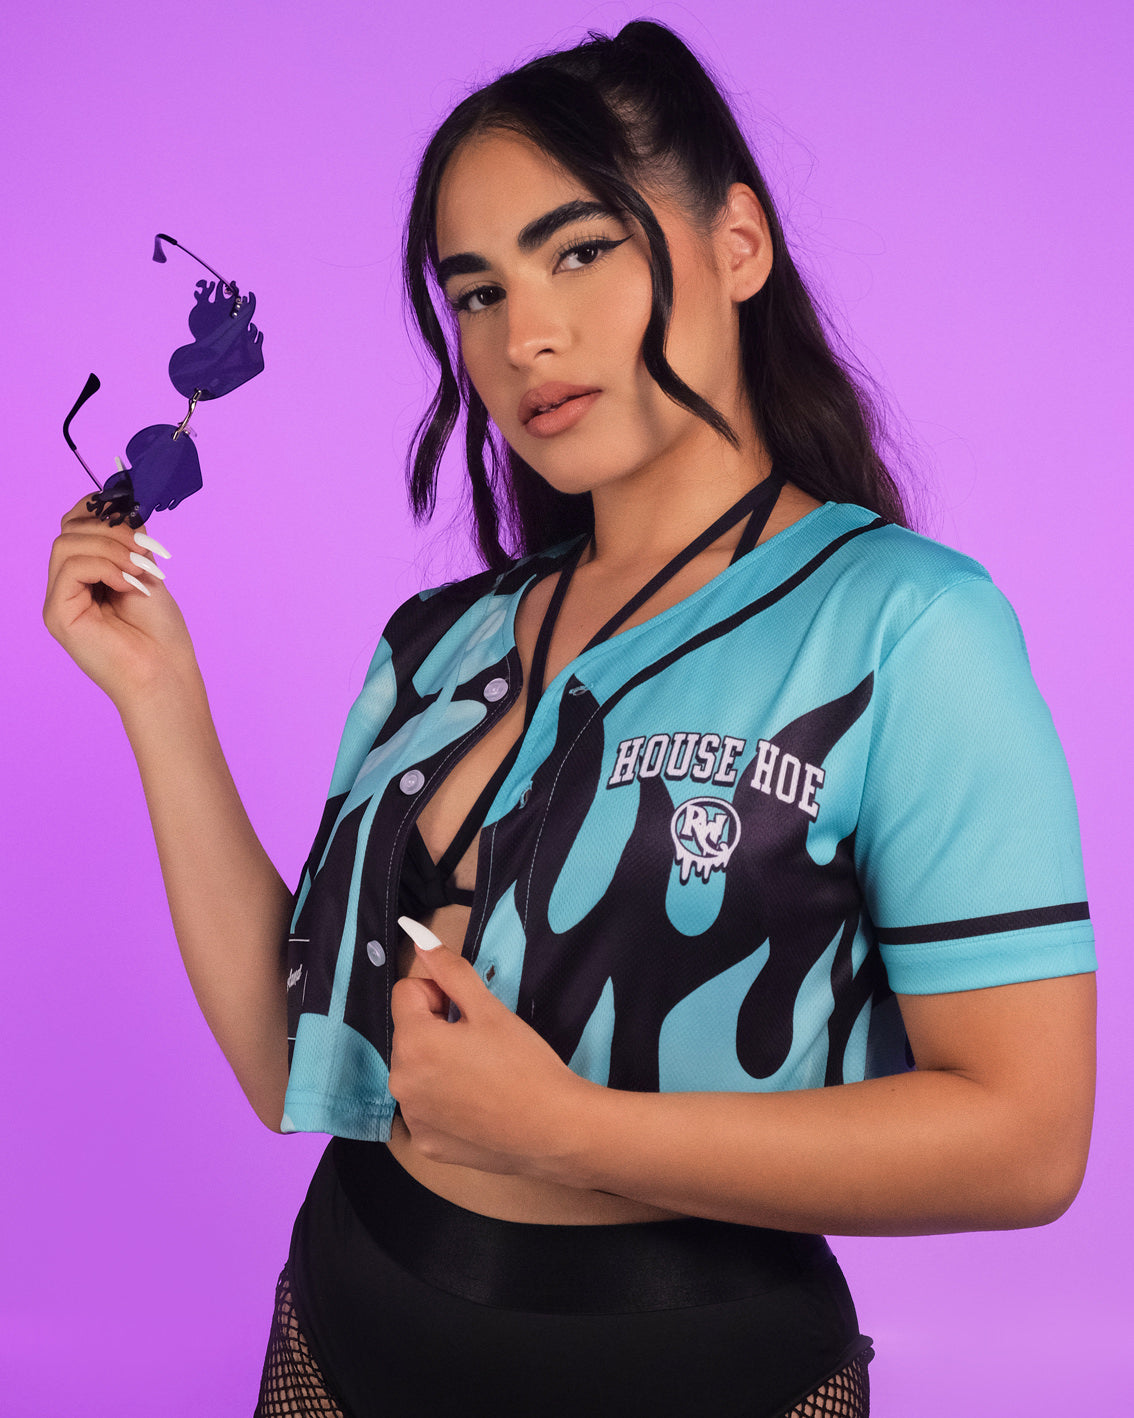 House Hoe Cropped Jersey